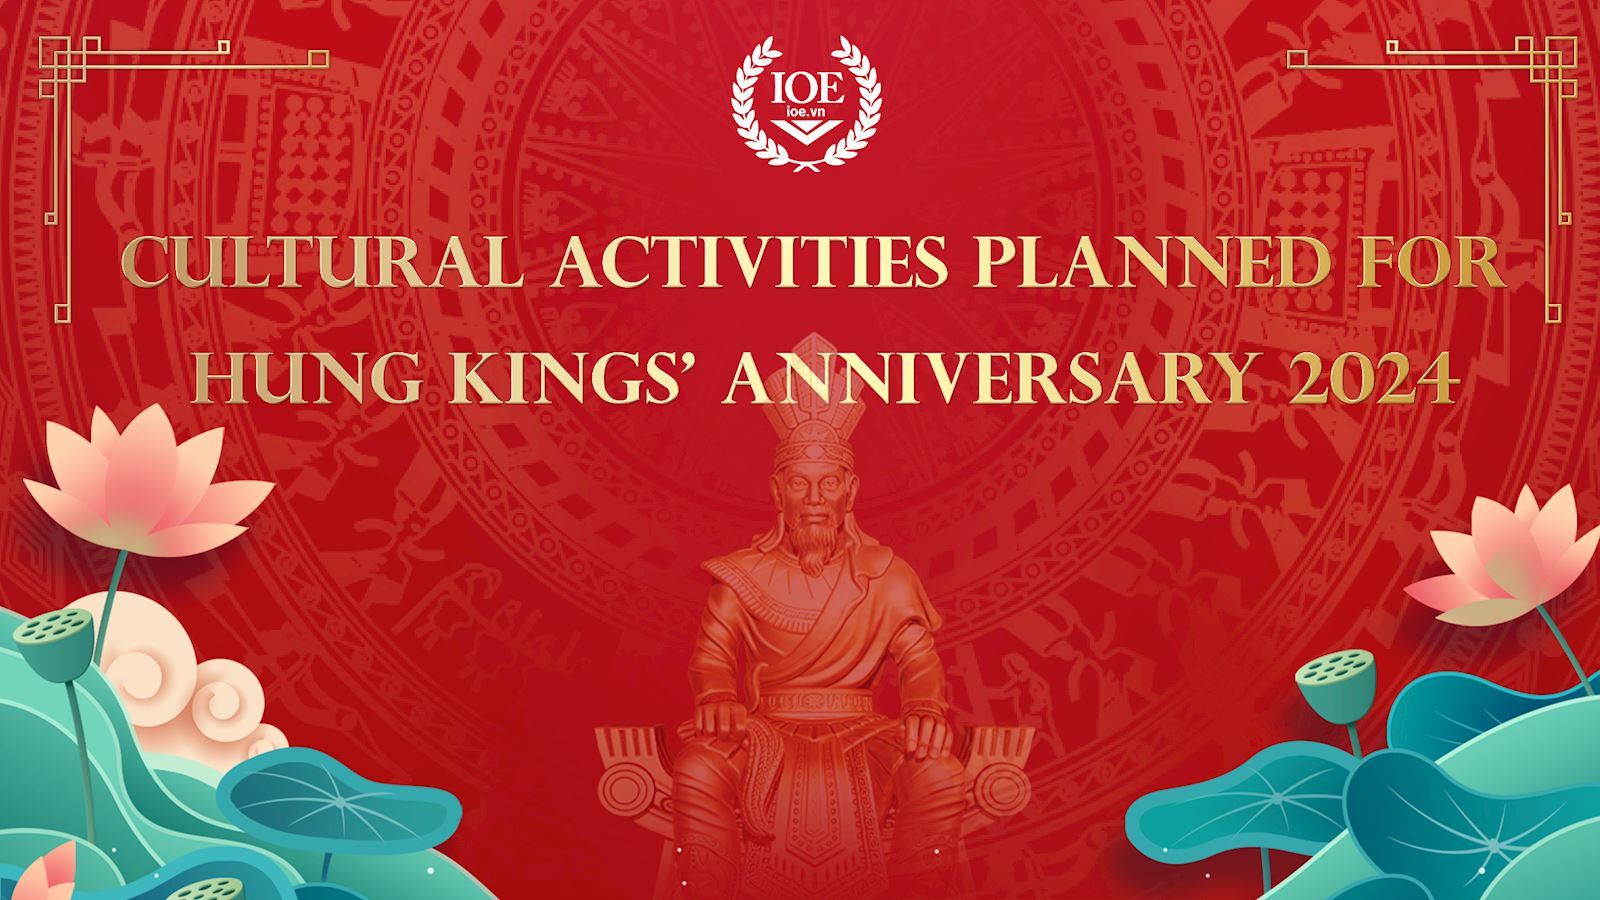 Cultural activities planned for Hung Kings’ Anniversary 2024